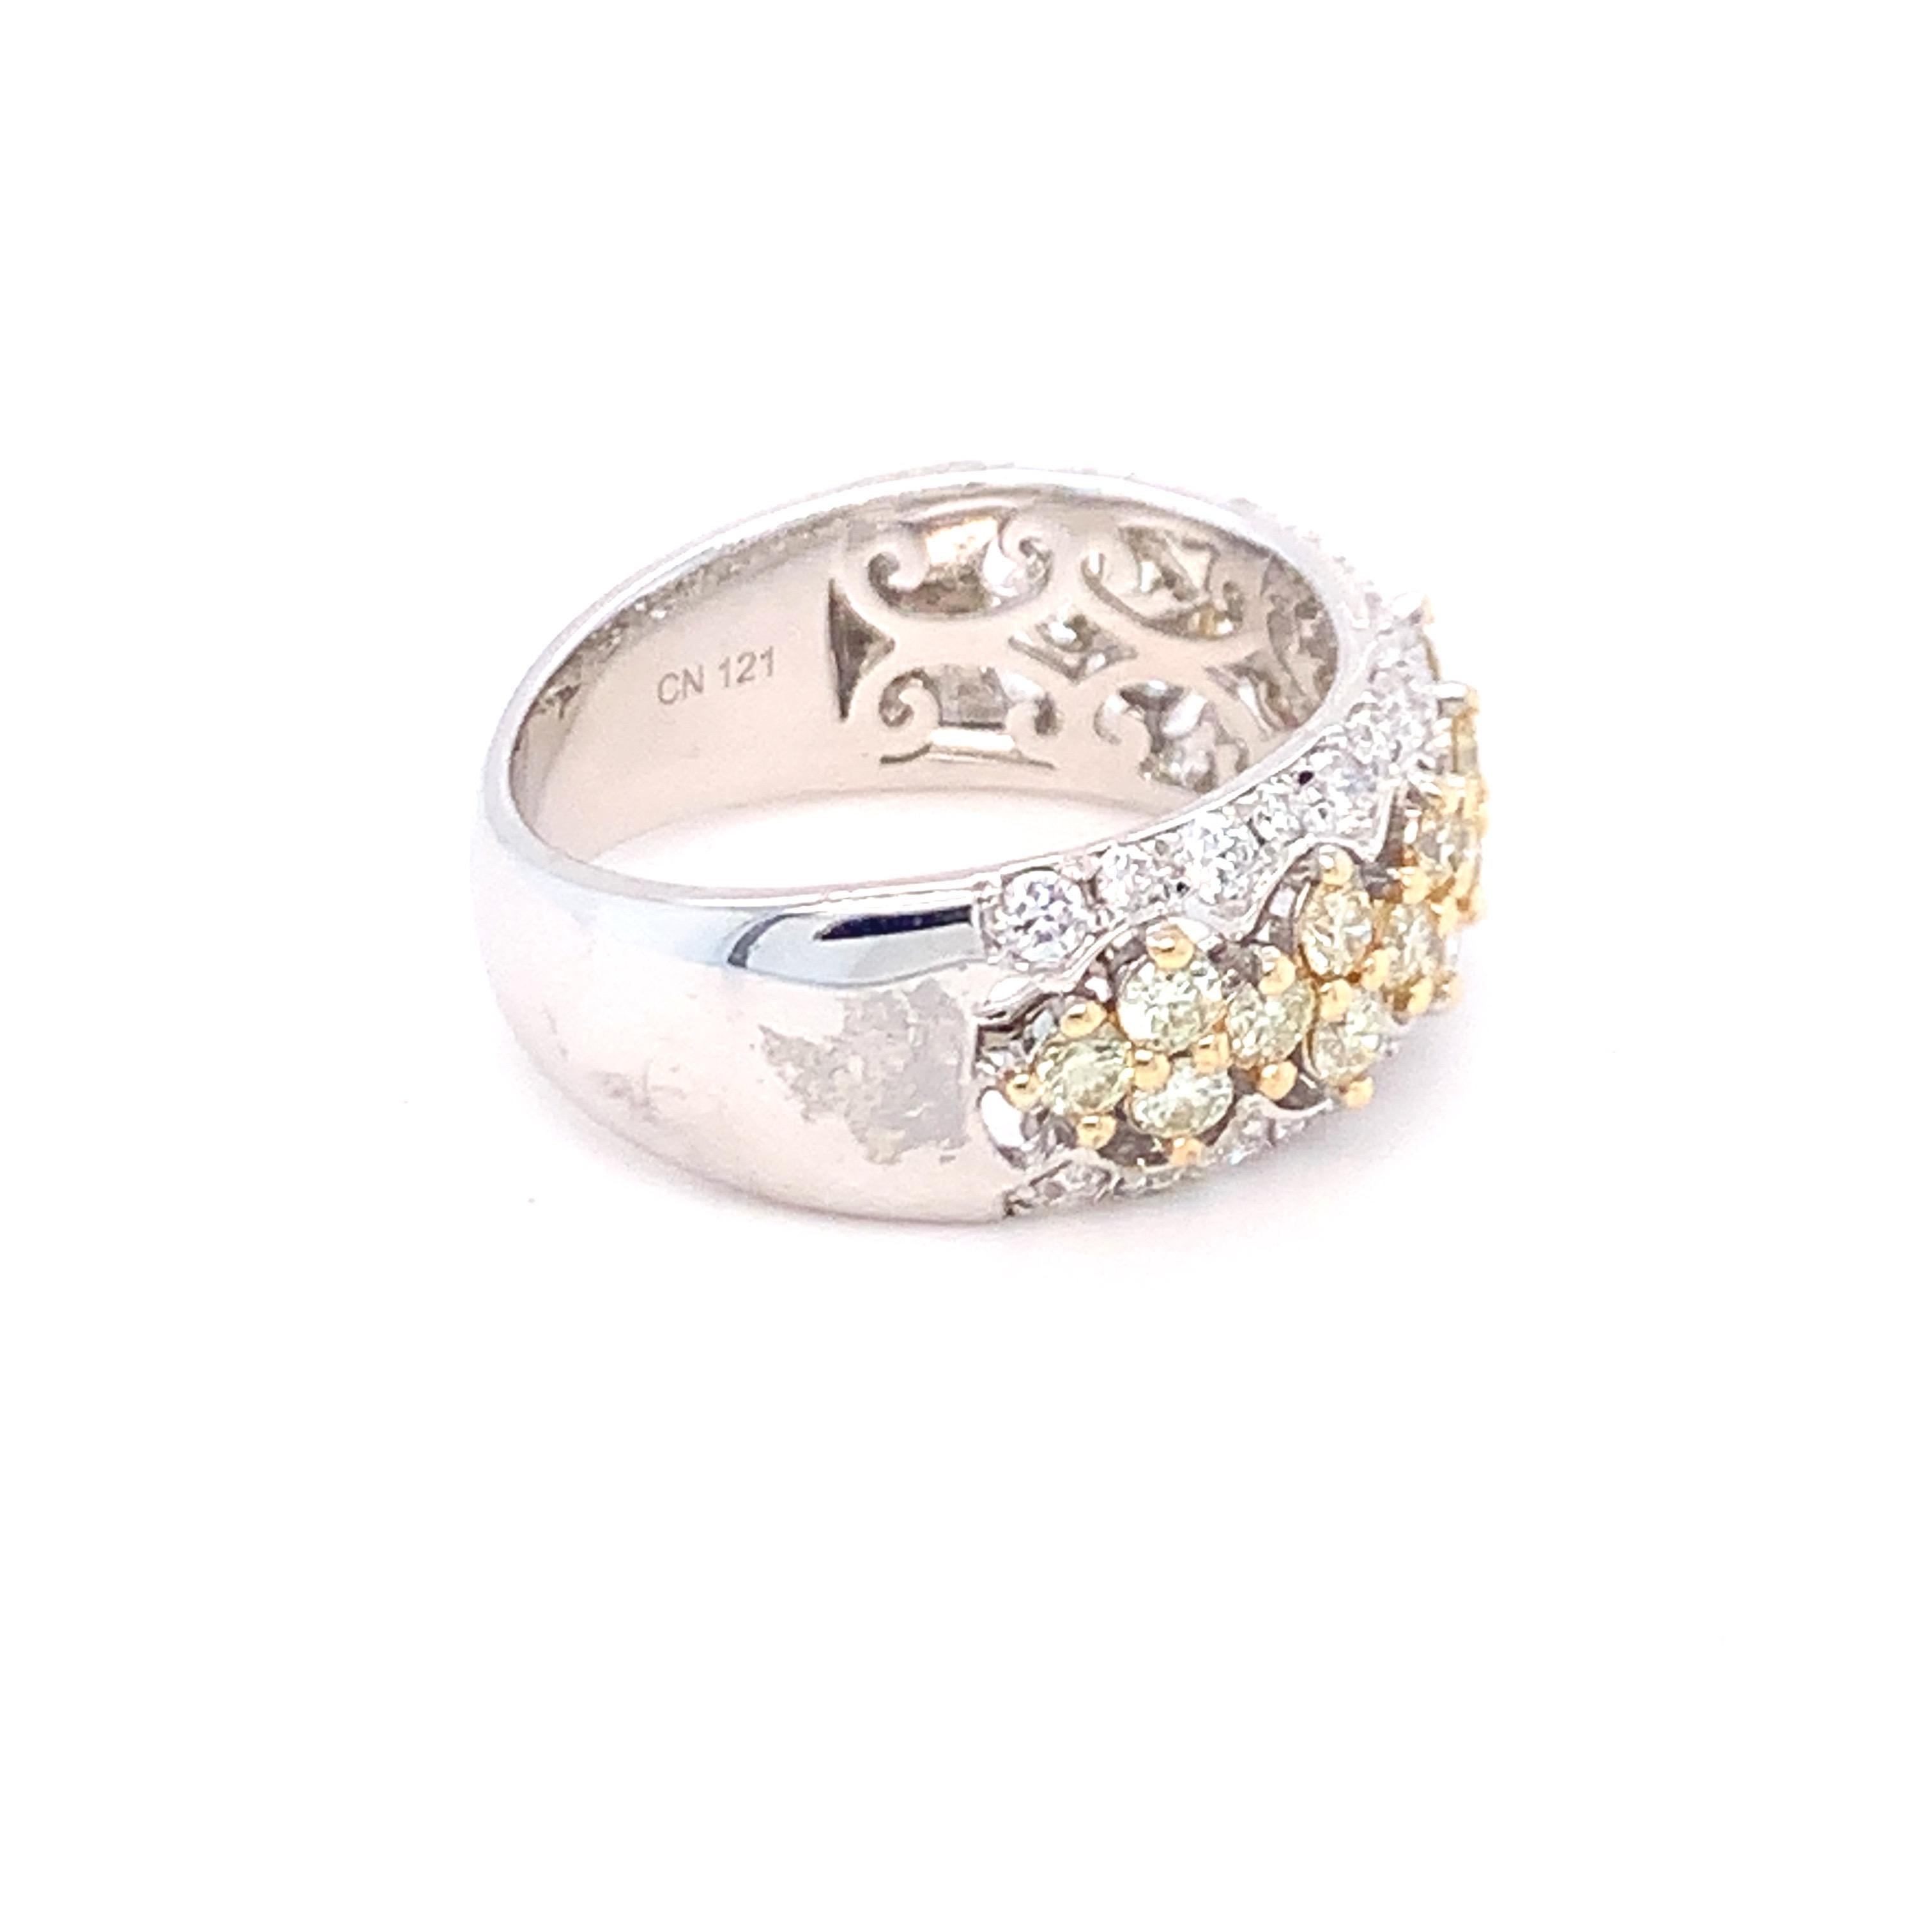 1.45 Carat Yellow & White Diamond Band Ring in 14K White Gold For Sale 7